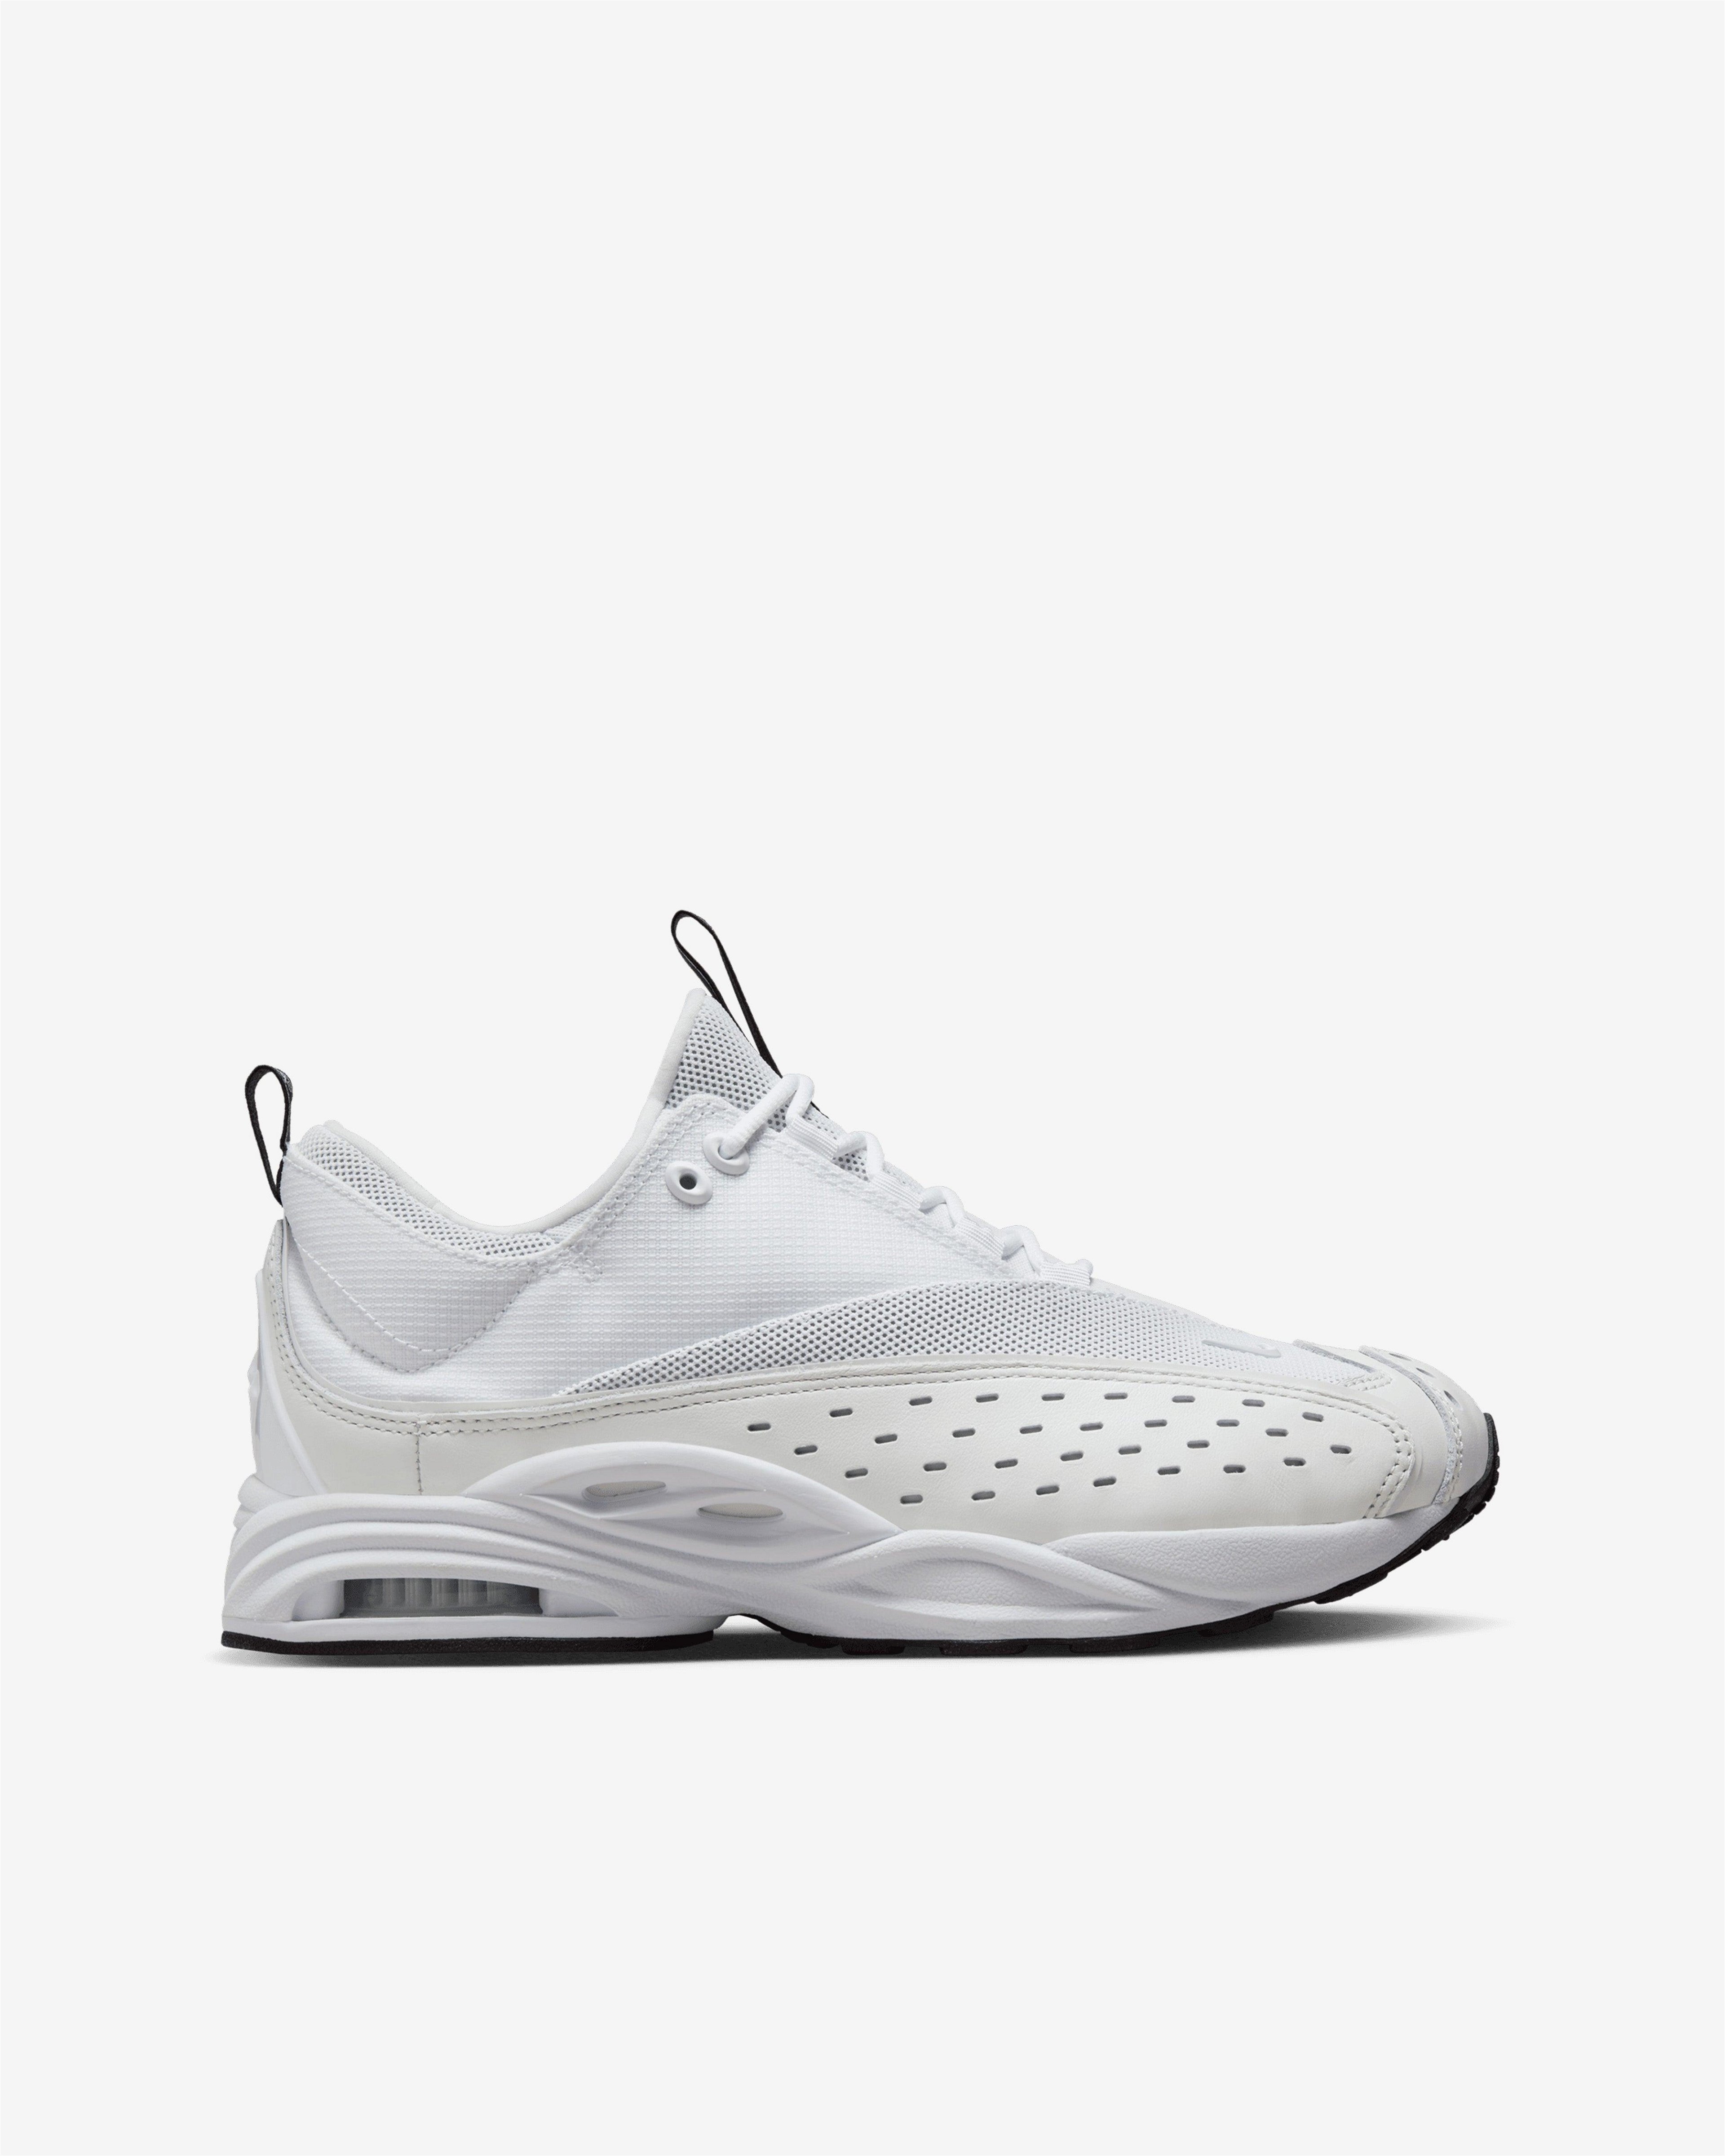 Nike - NOCTA Air Zoom Drive SP Sneakers - (DX5854-100) by NIKE